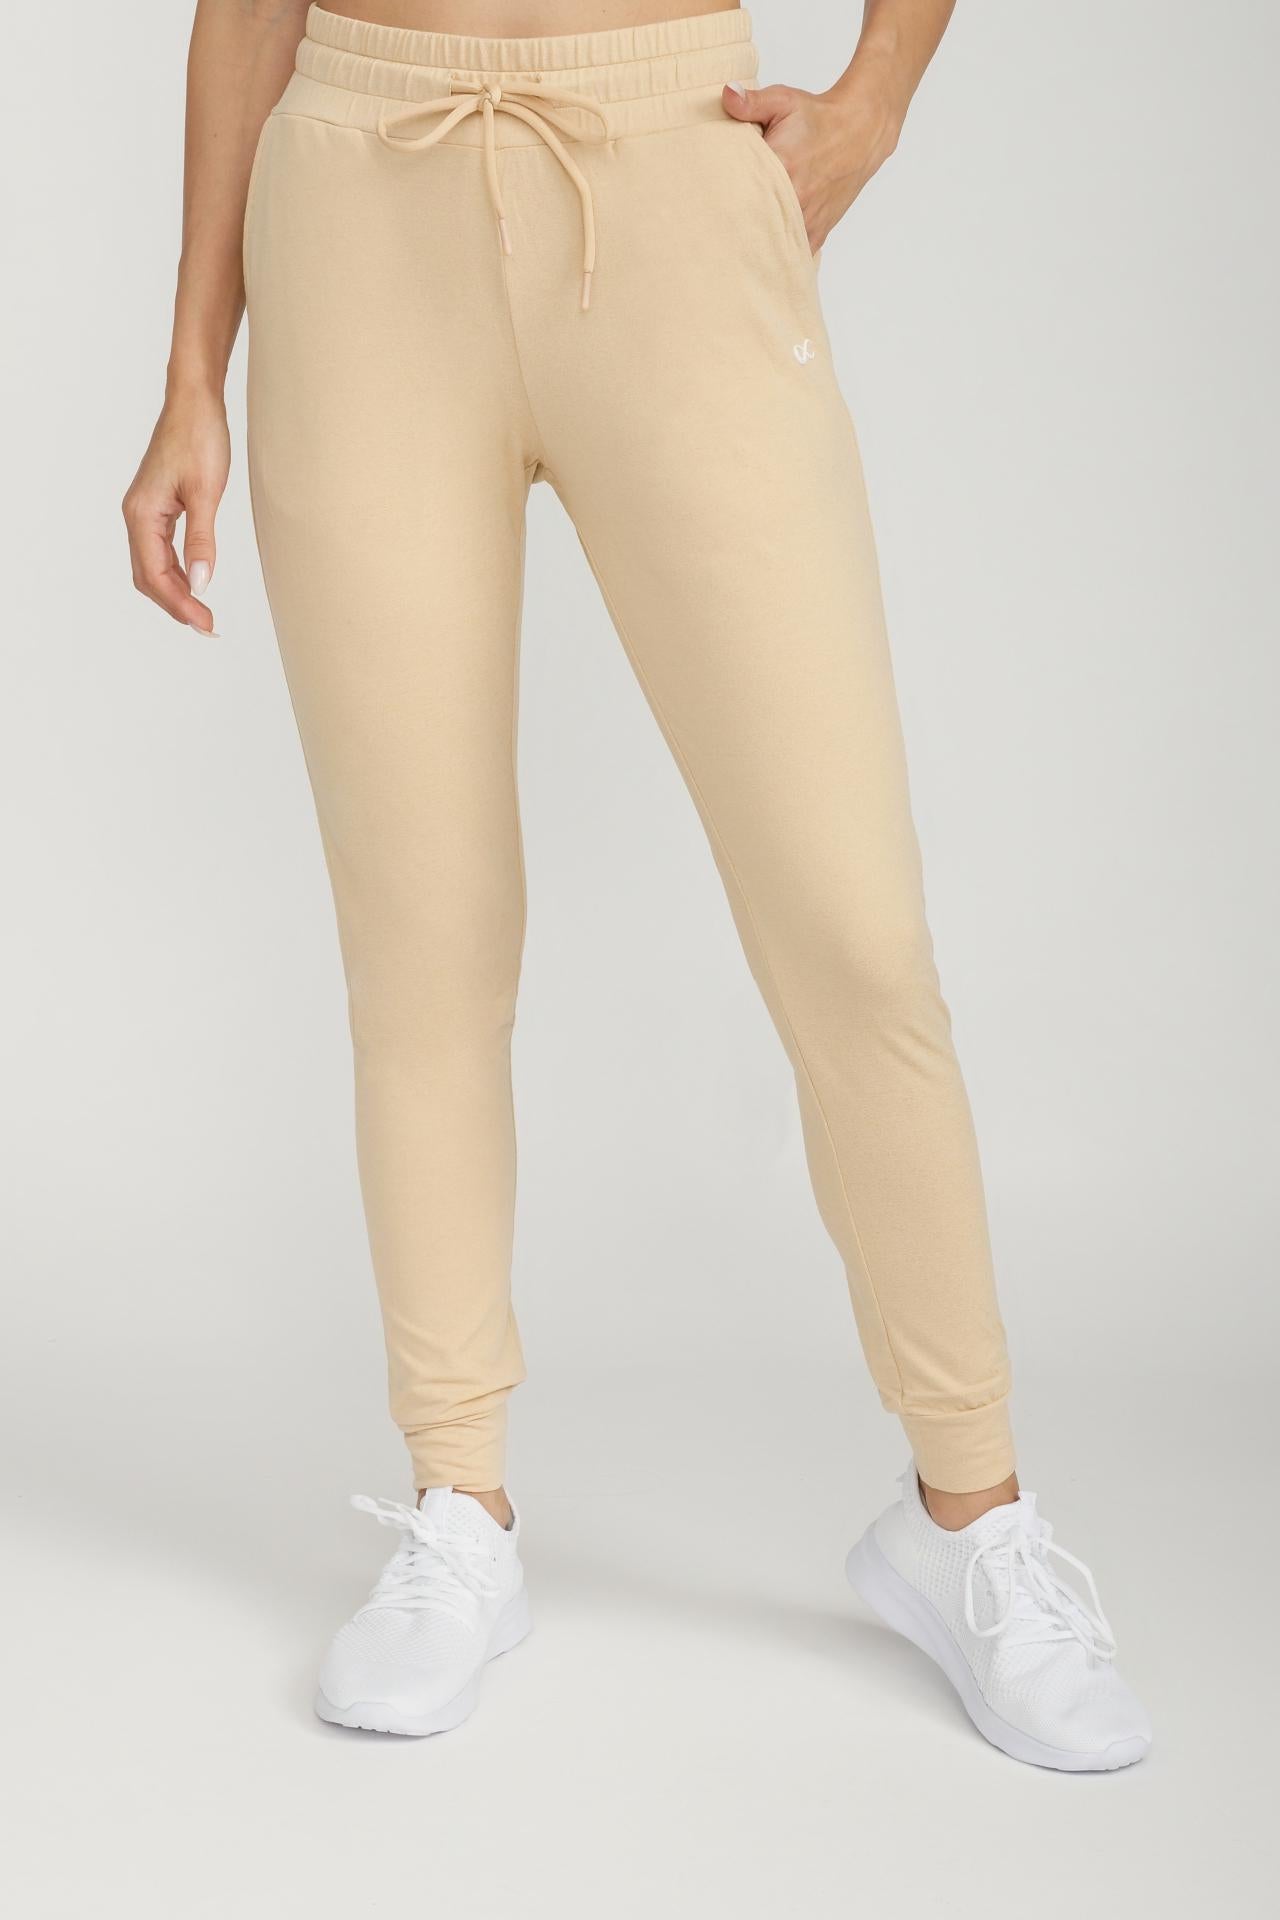 Women's Joggers  Southern Athletica